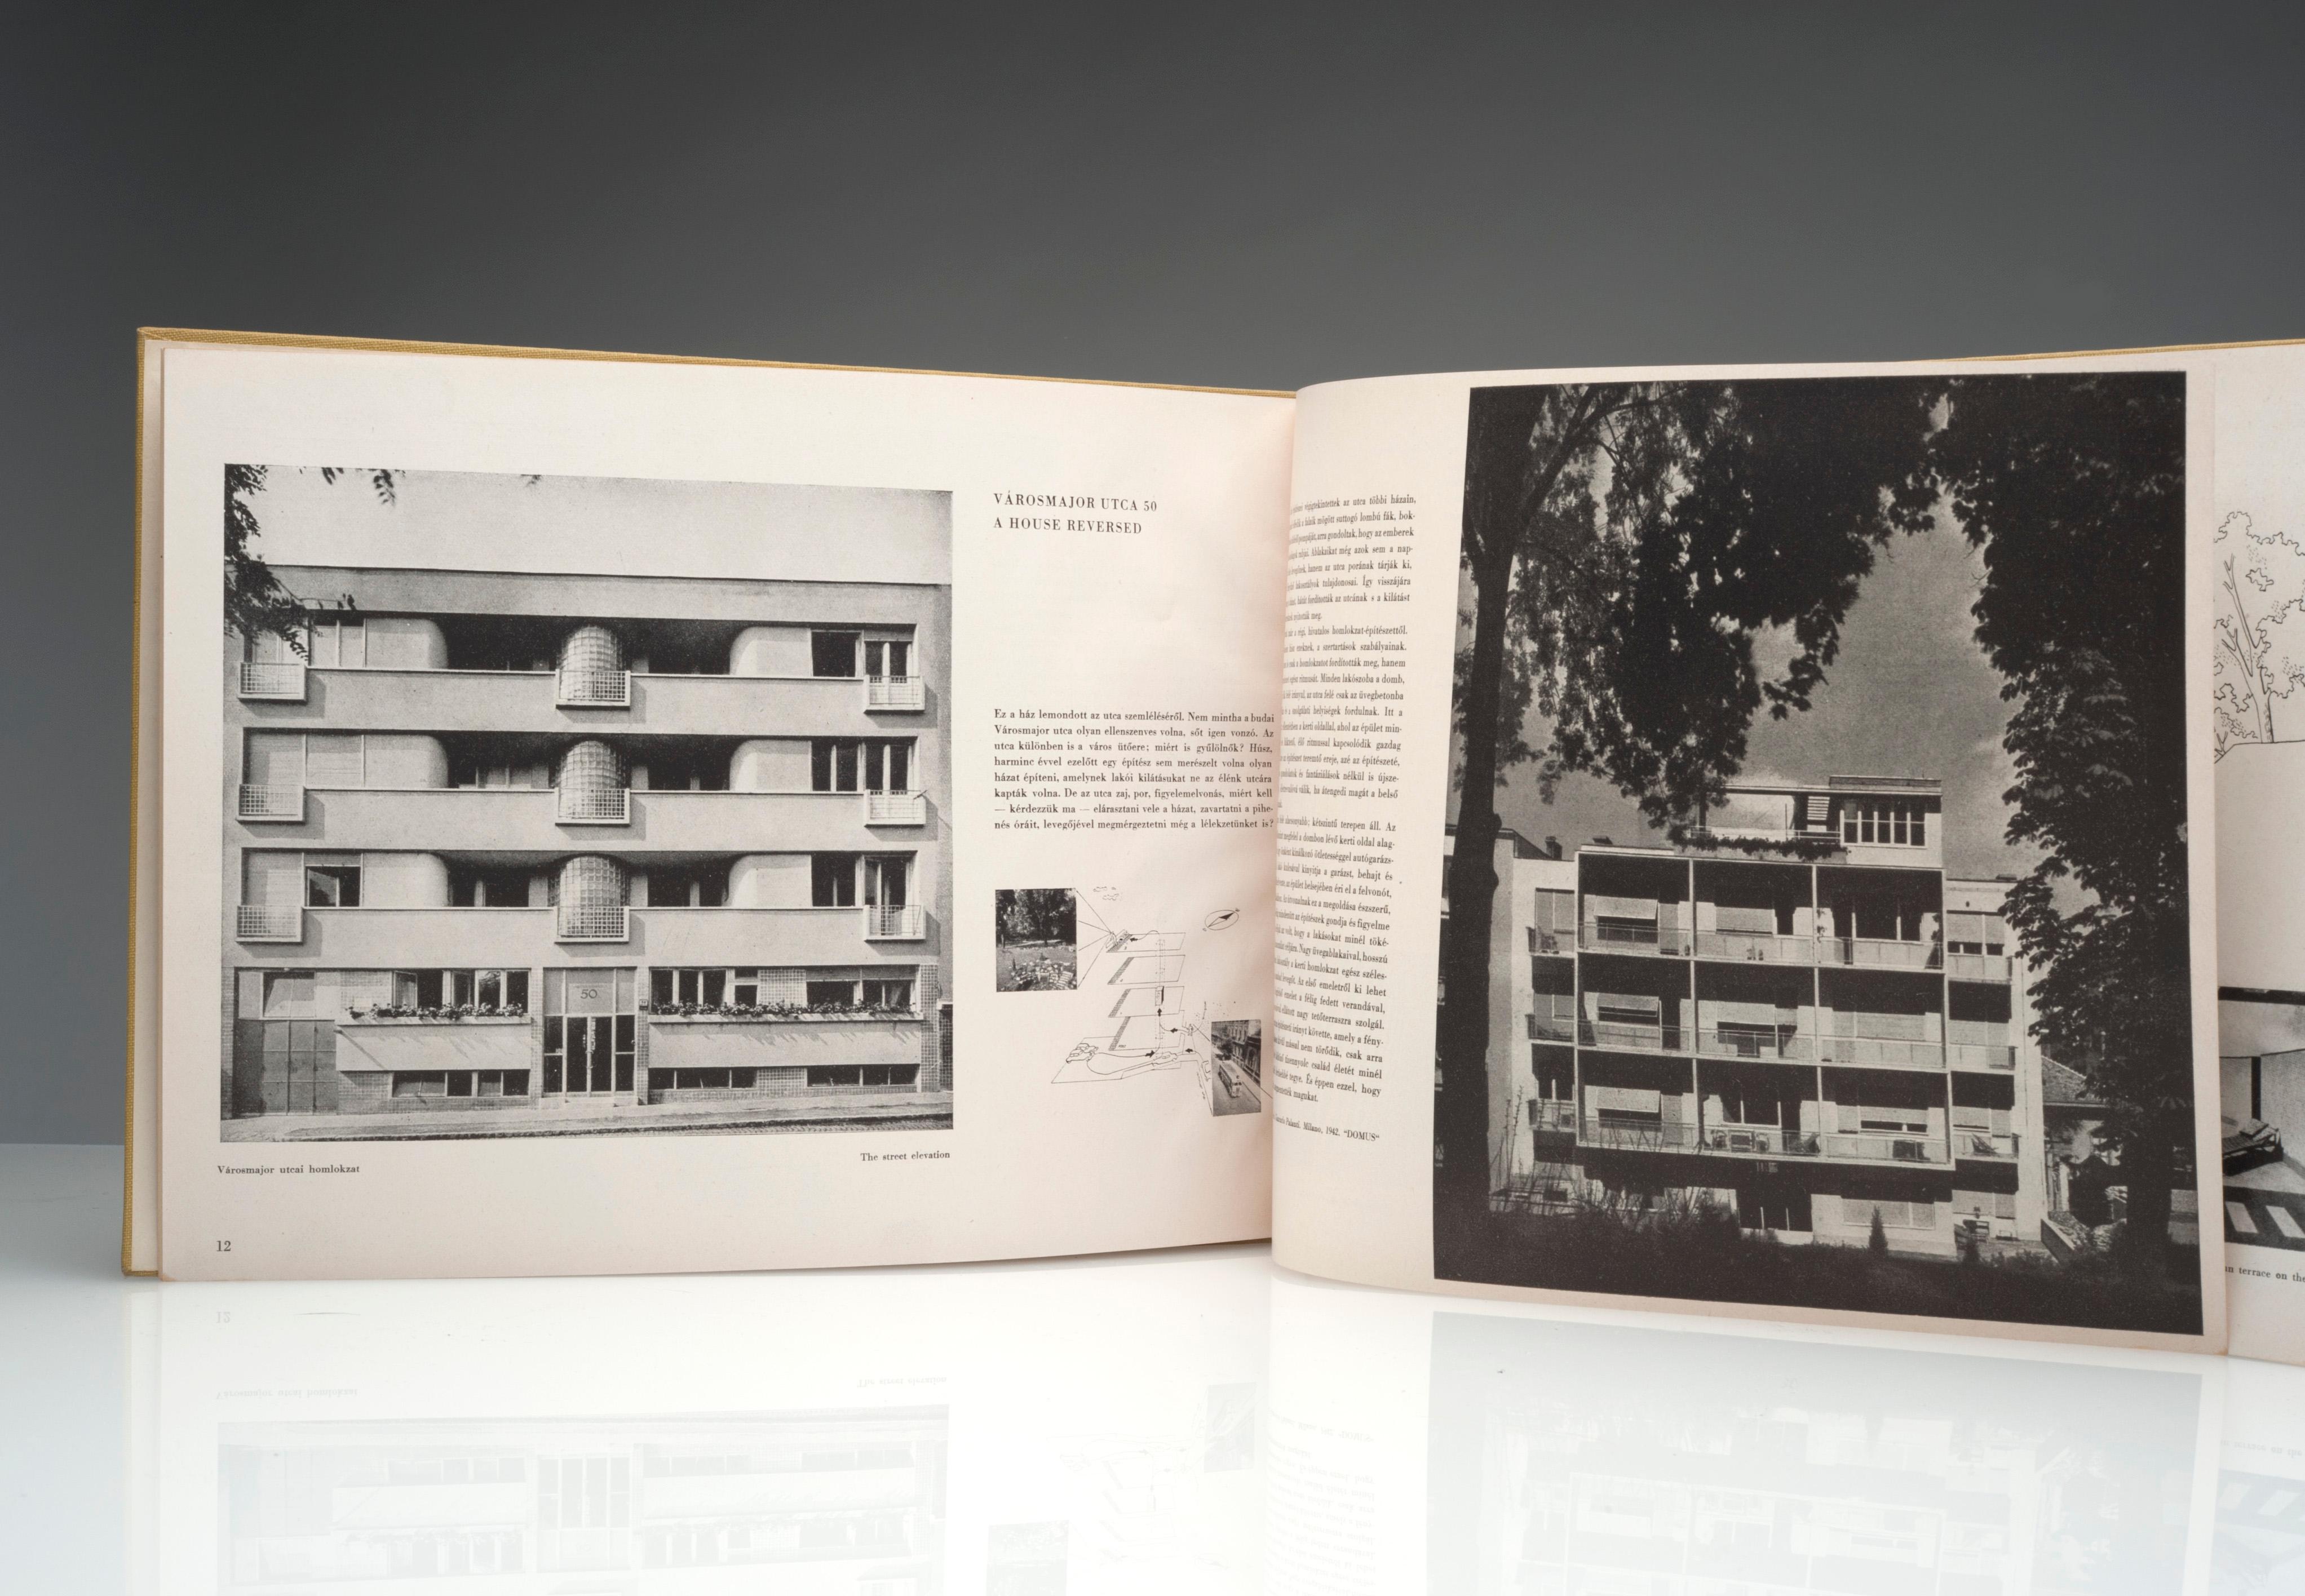 Works of Architects Olgyay and Olgyay Modern Hungarian Architecture, 1948 5